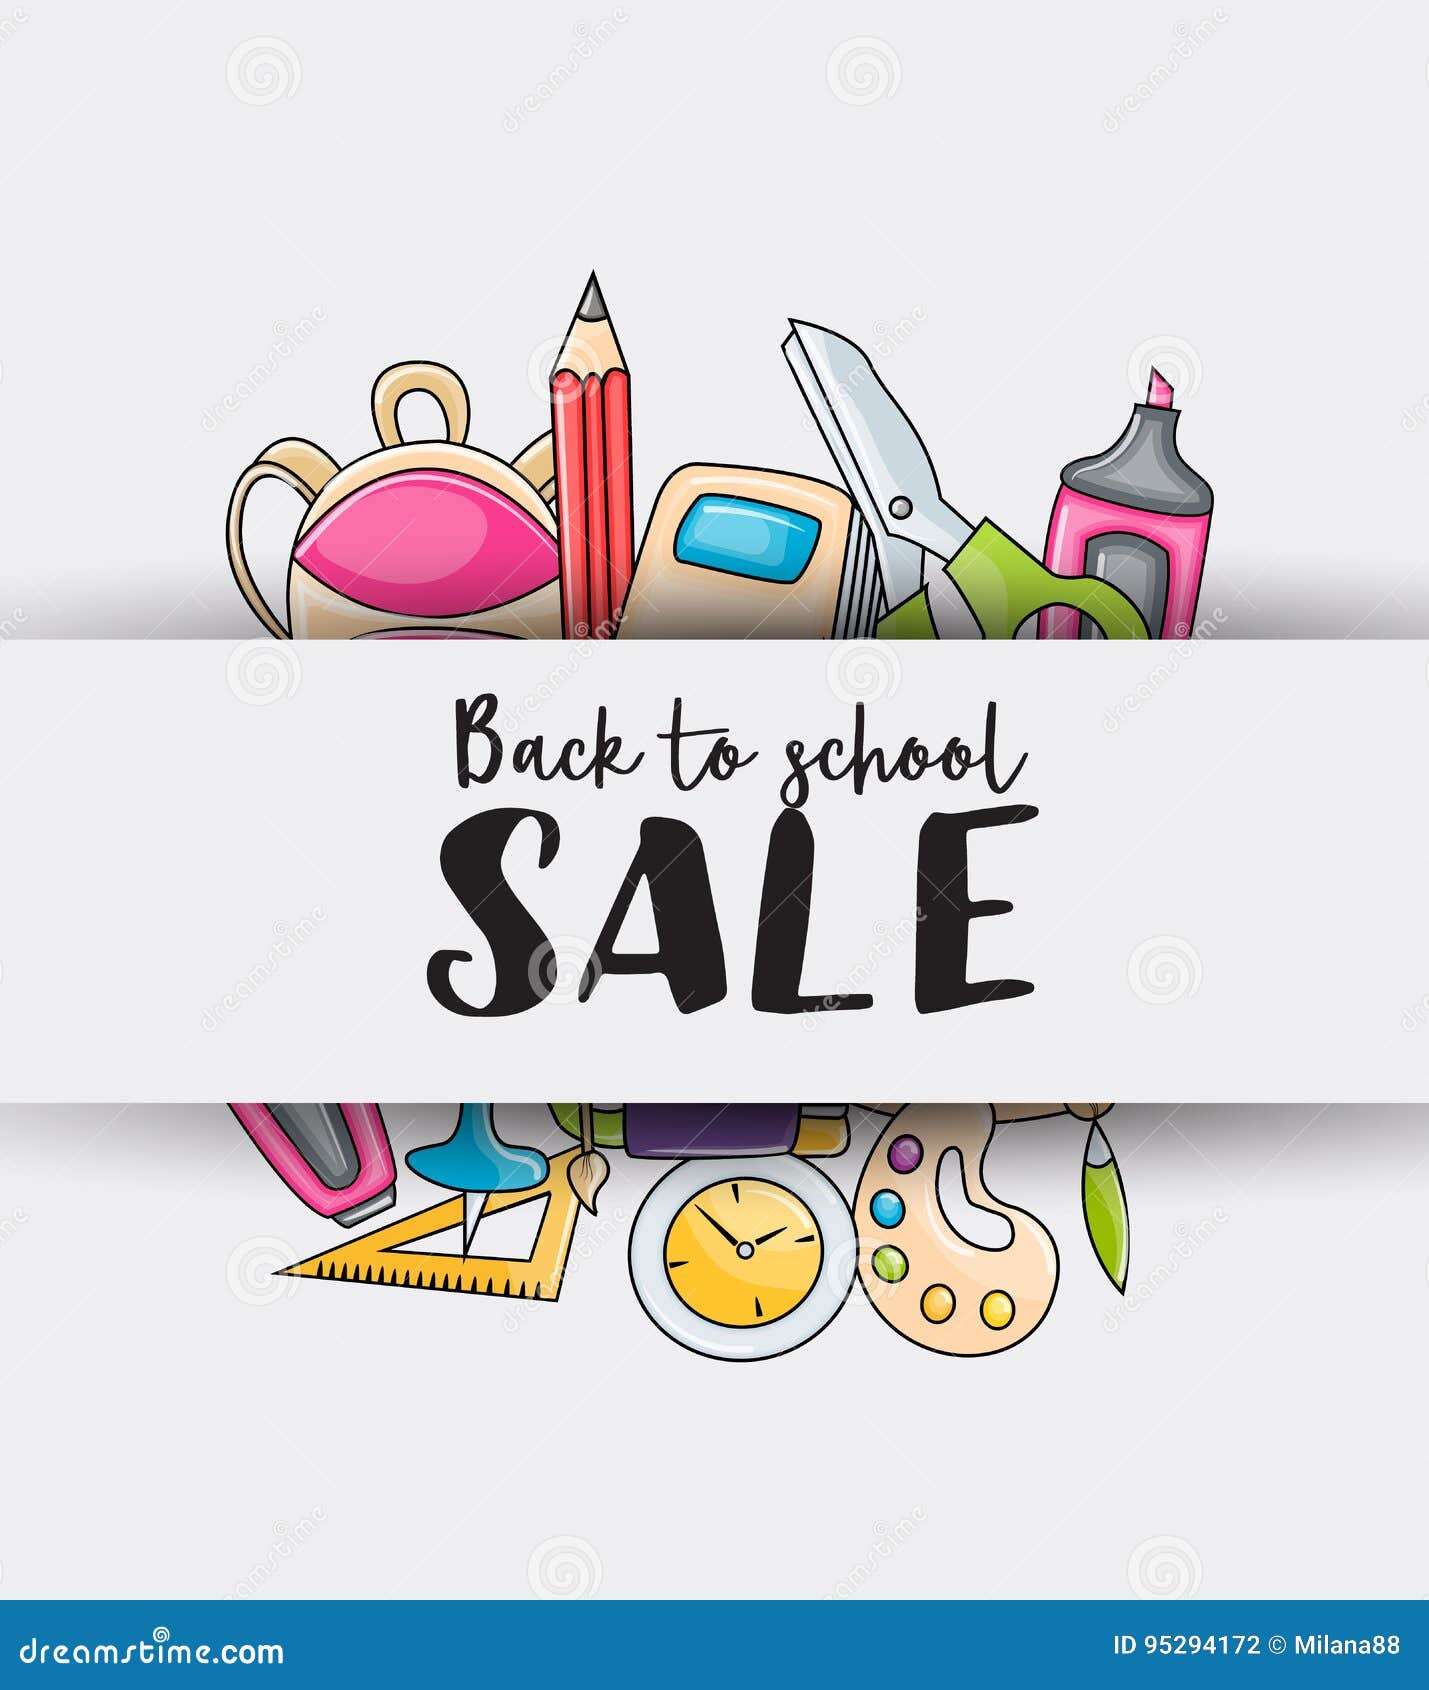 Back To School Sale Doodle Clip Art Greeting Card Stock Vector